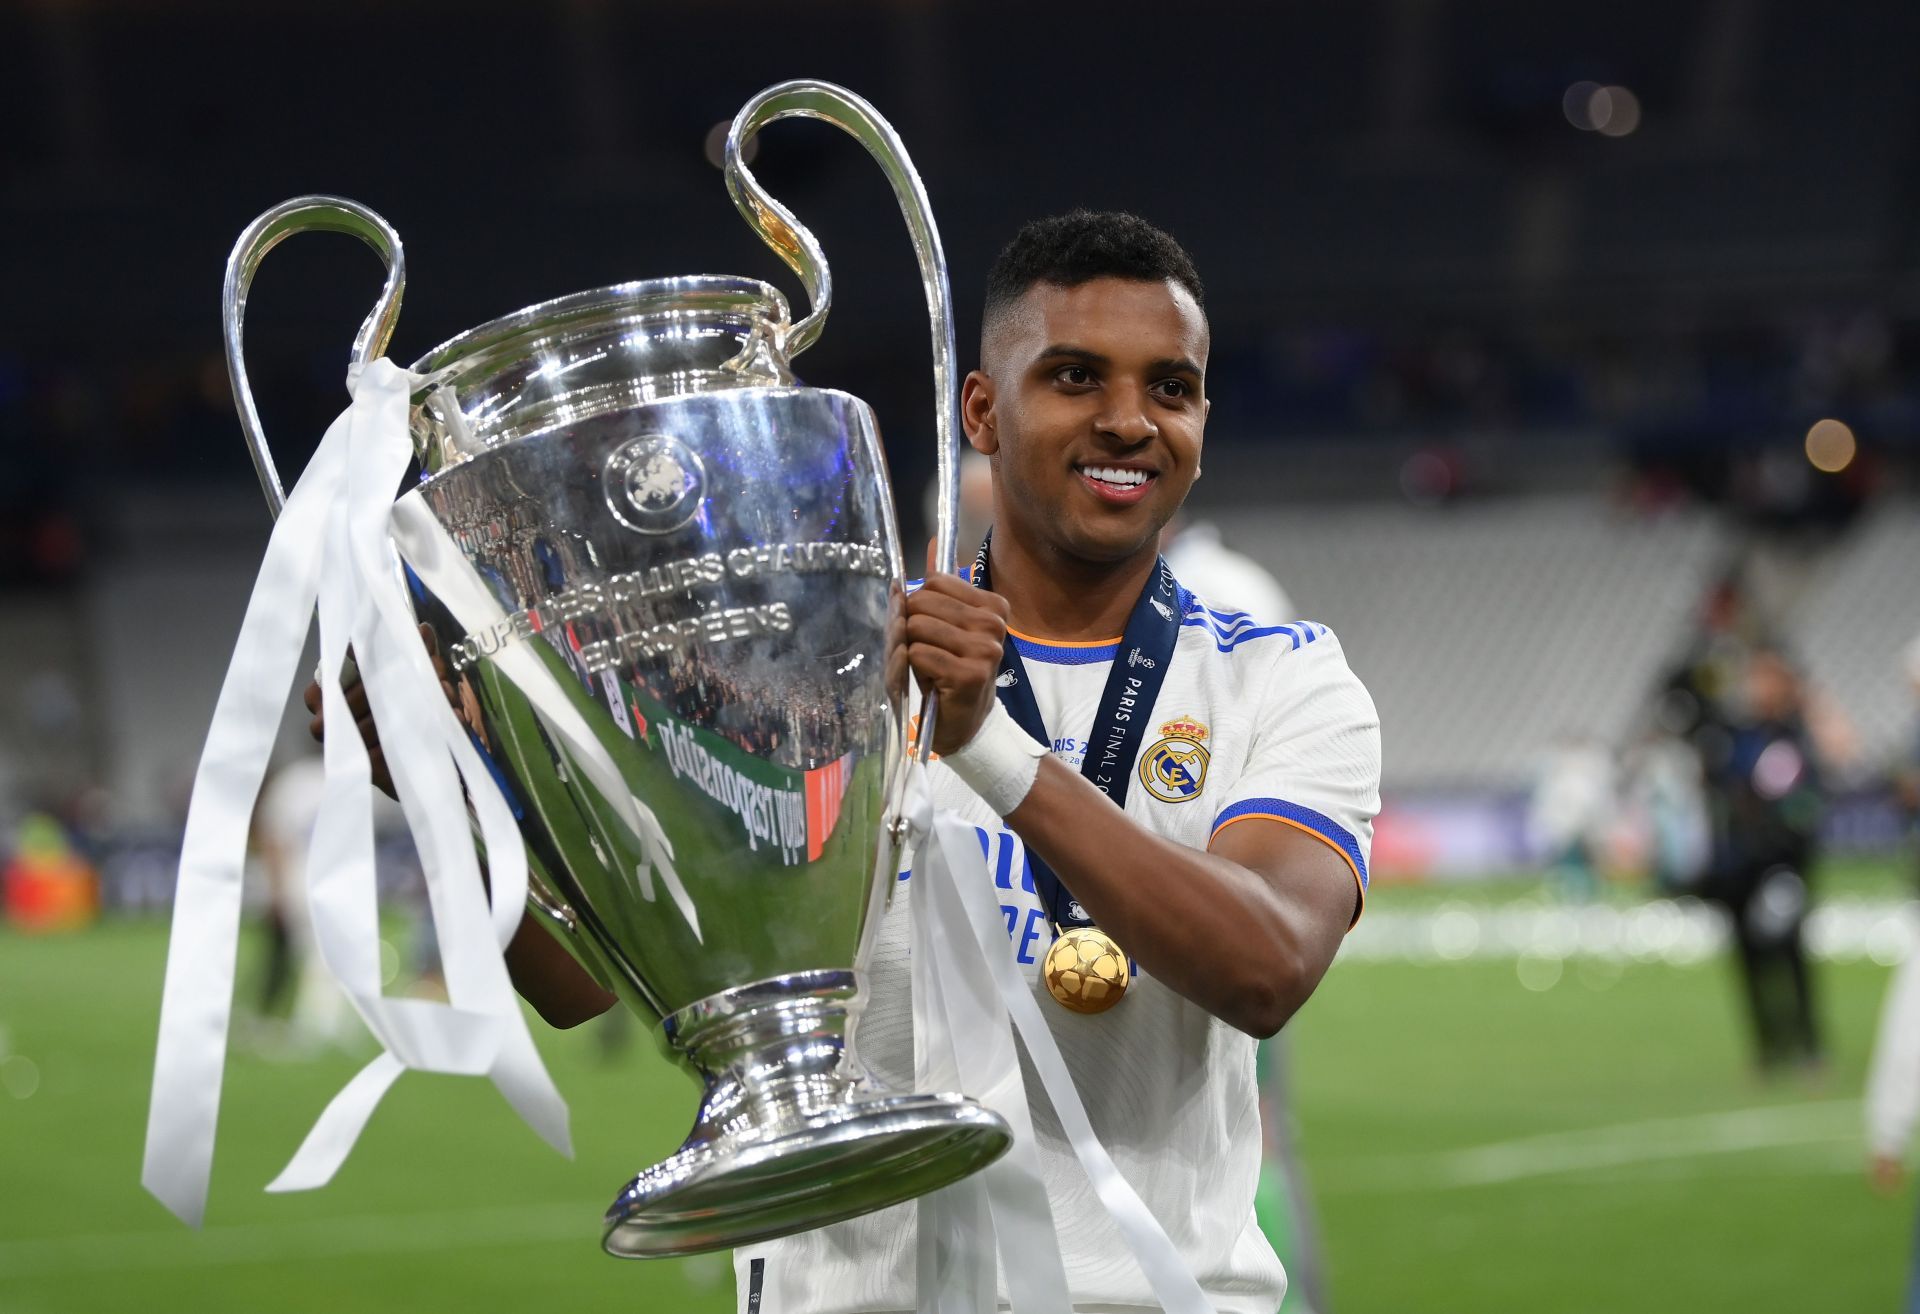 Rodrygo is currently one of the most promising footballers